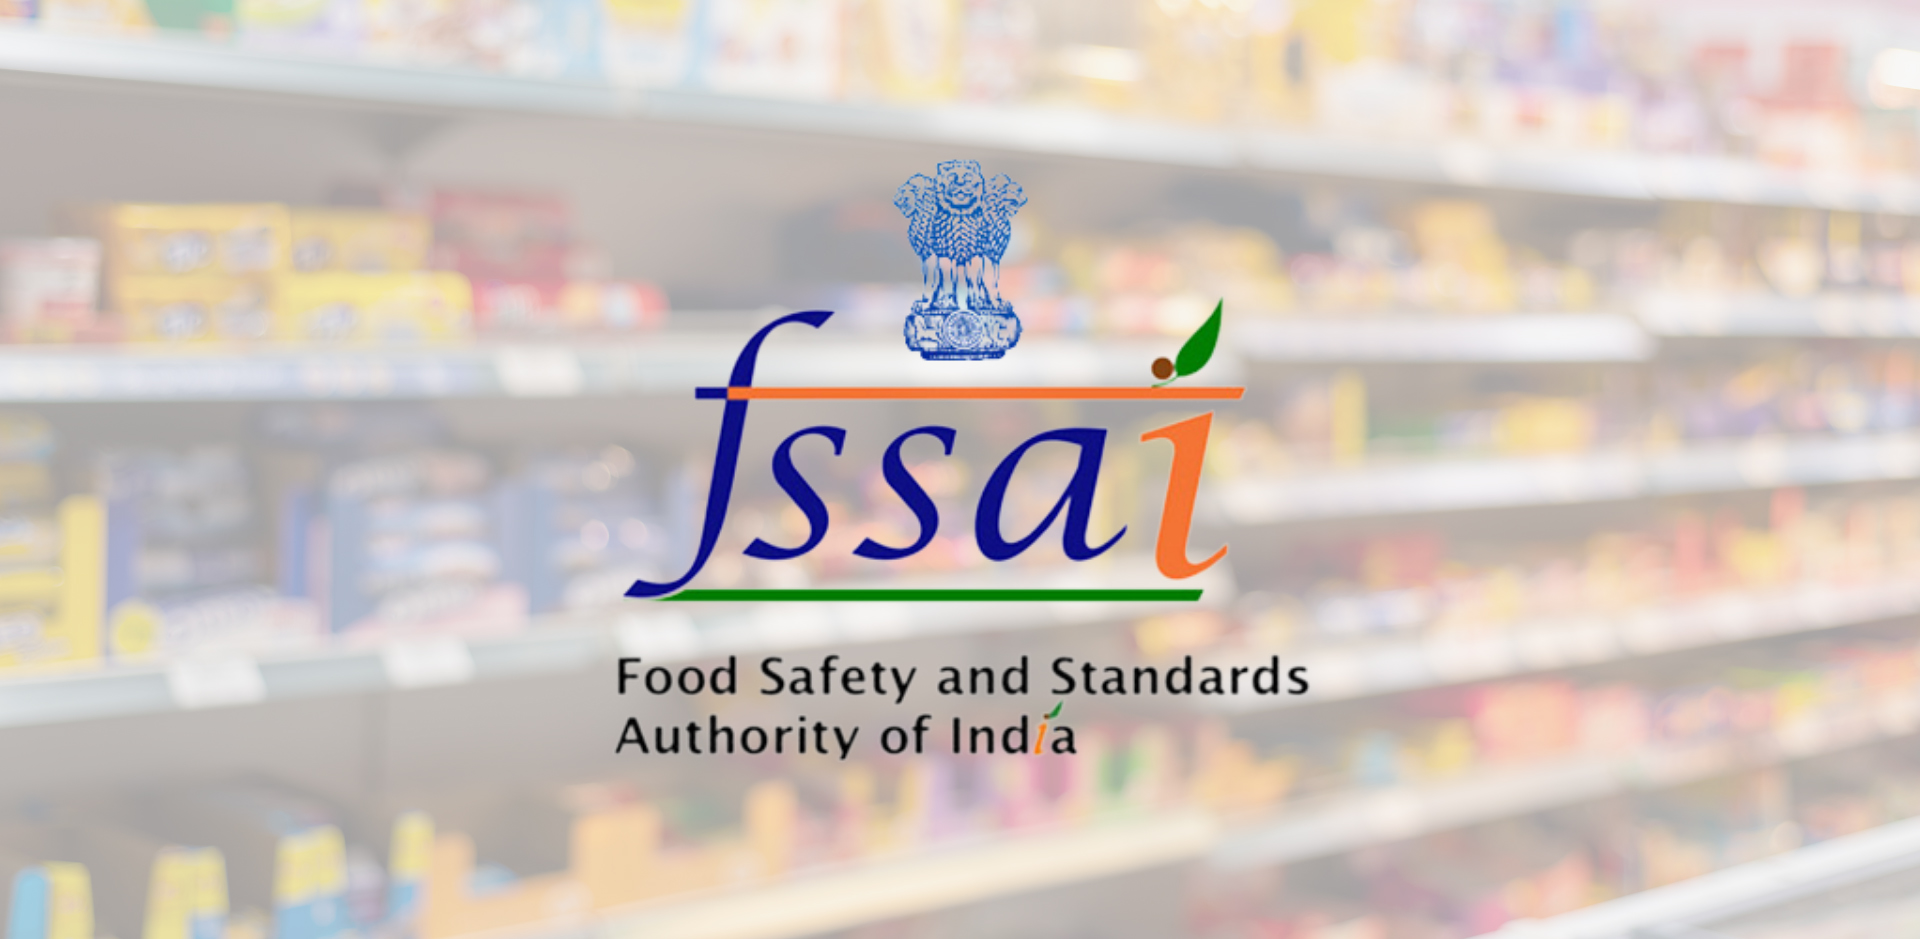 FSSAI Food Safety Registration Services in India